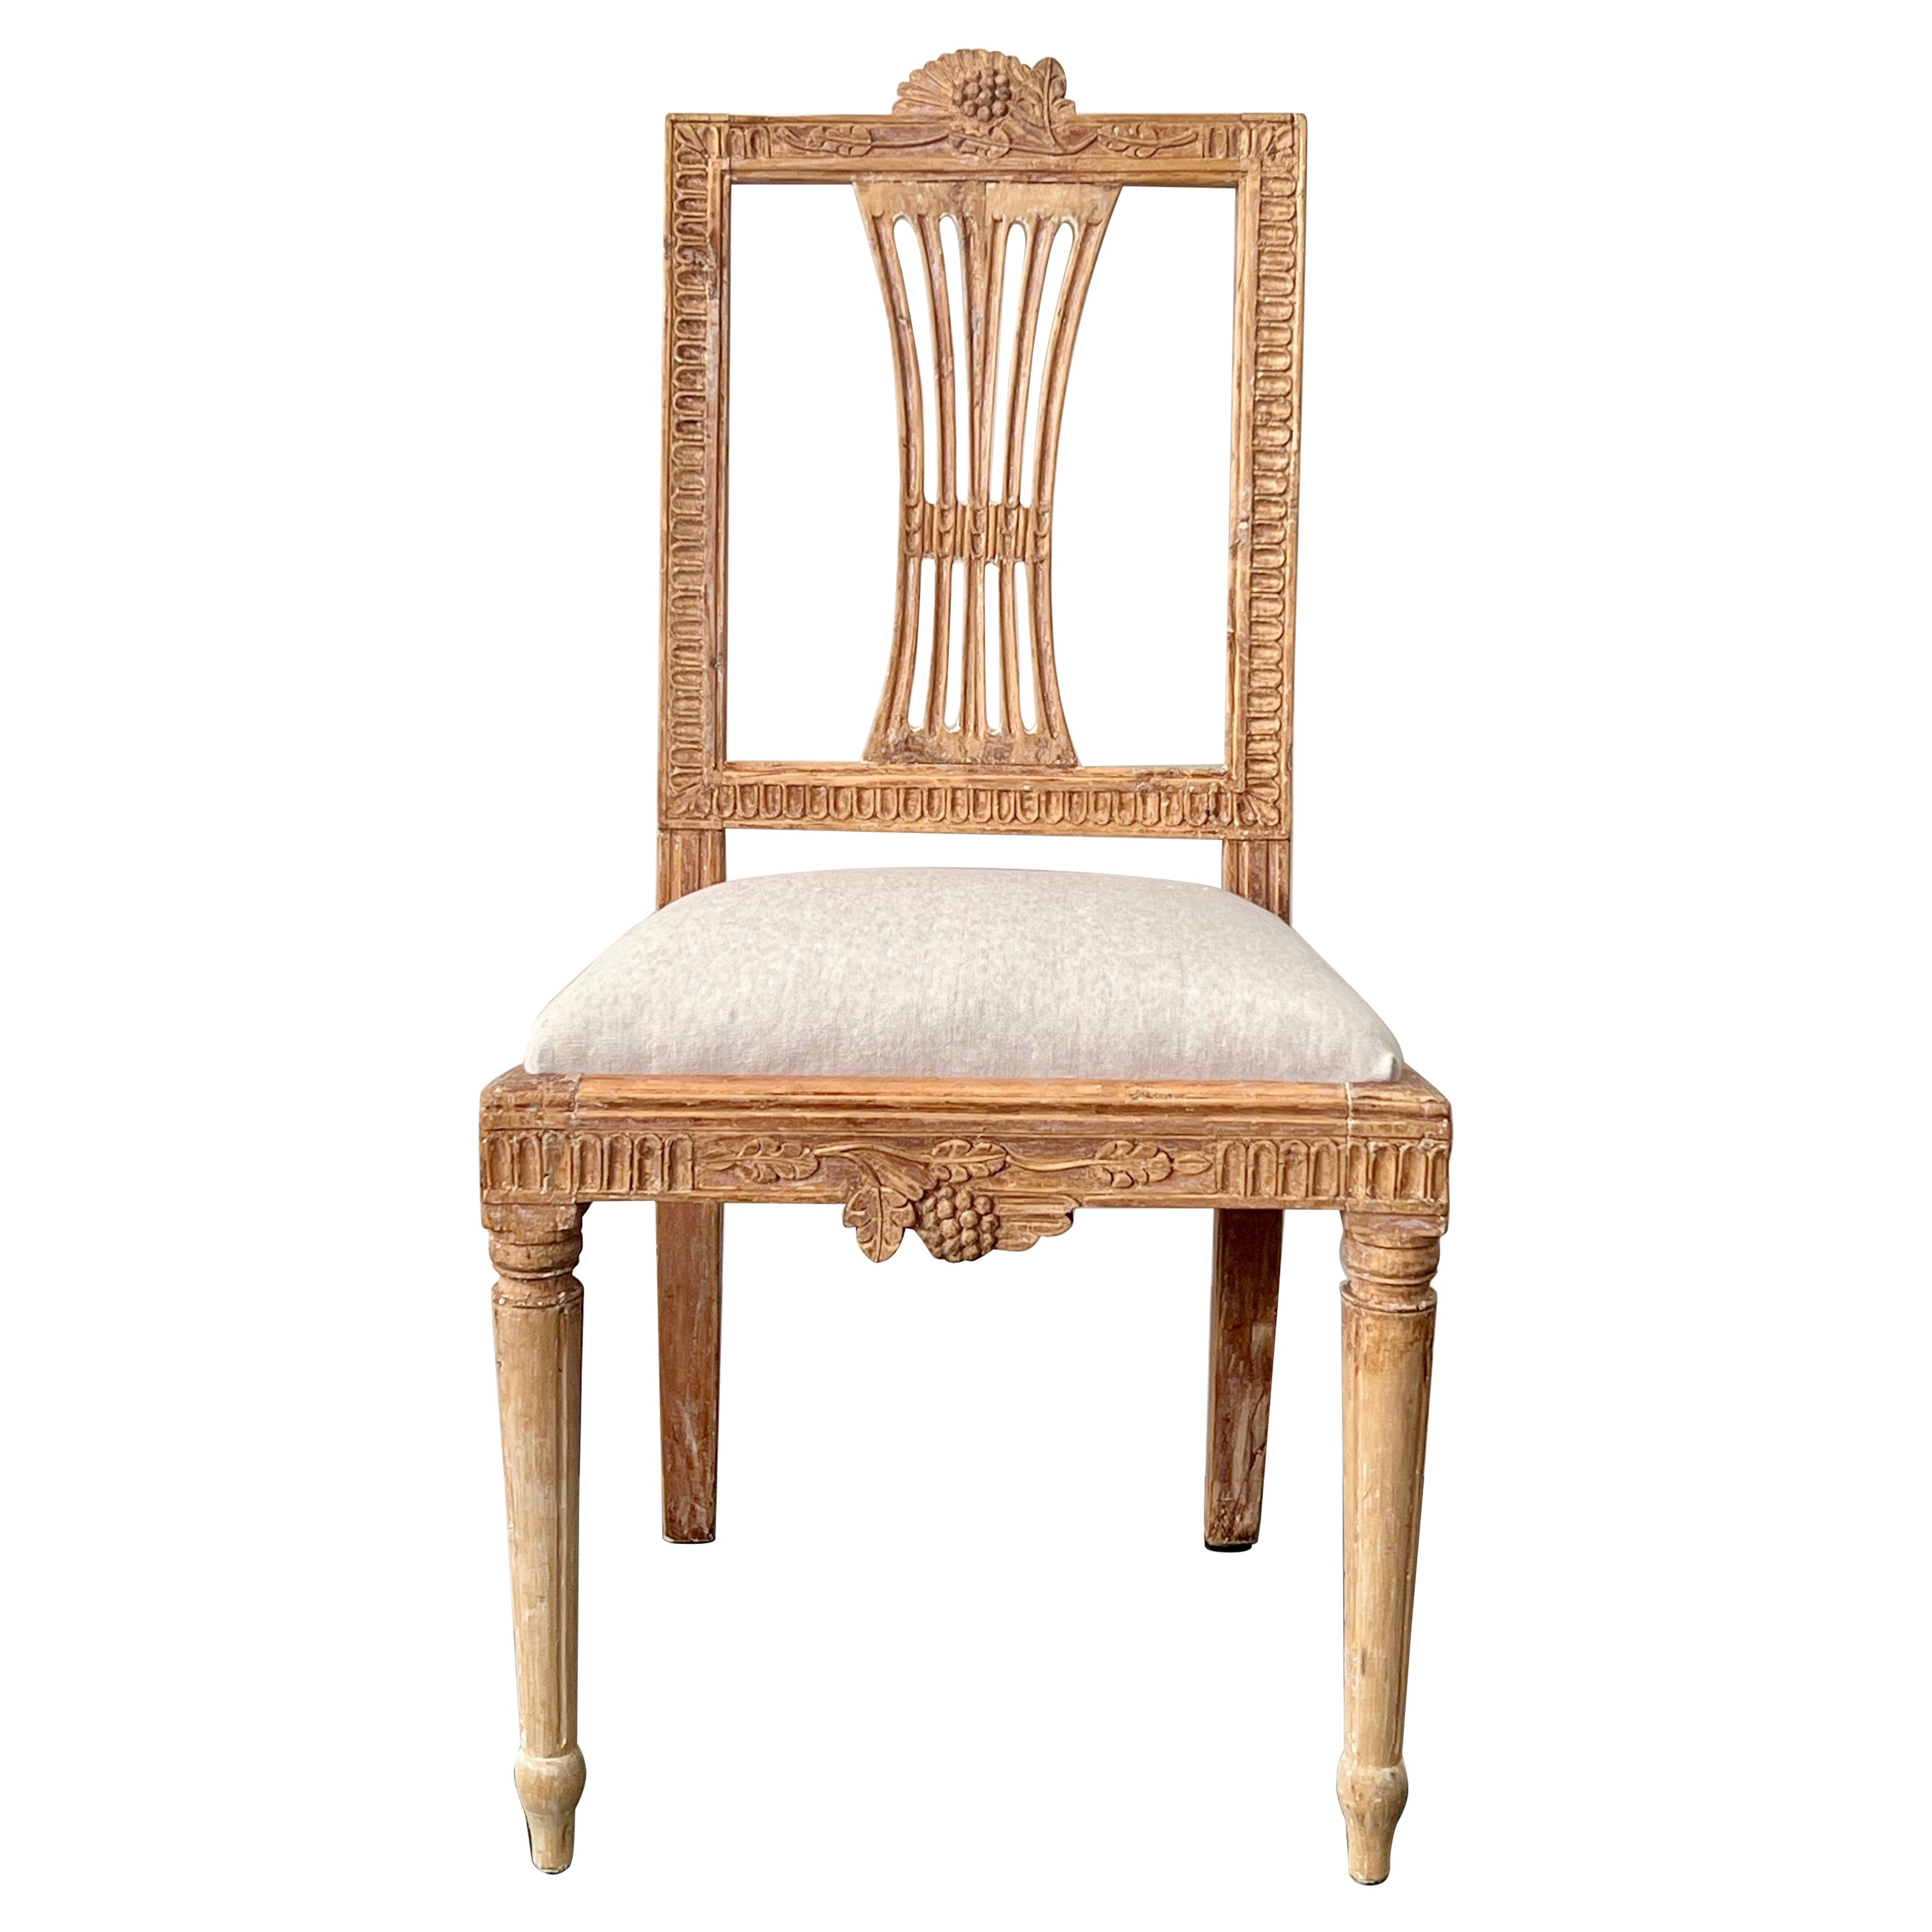 18th century Swedish Gustavian Period Lindome Side Chair For Sale